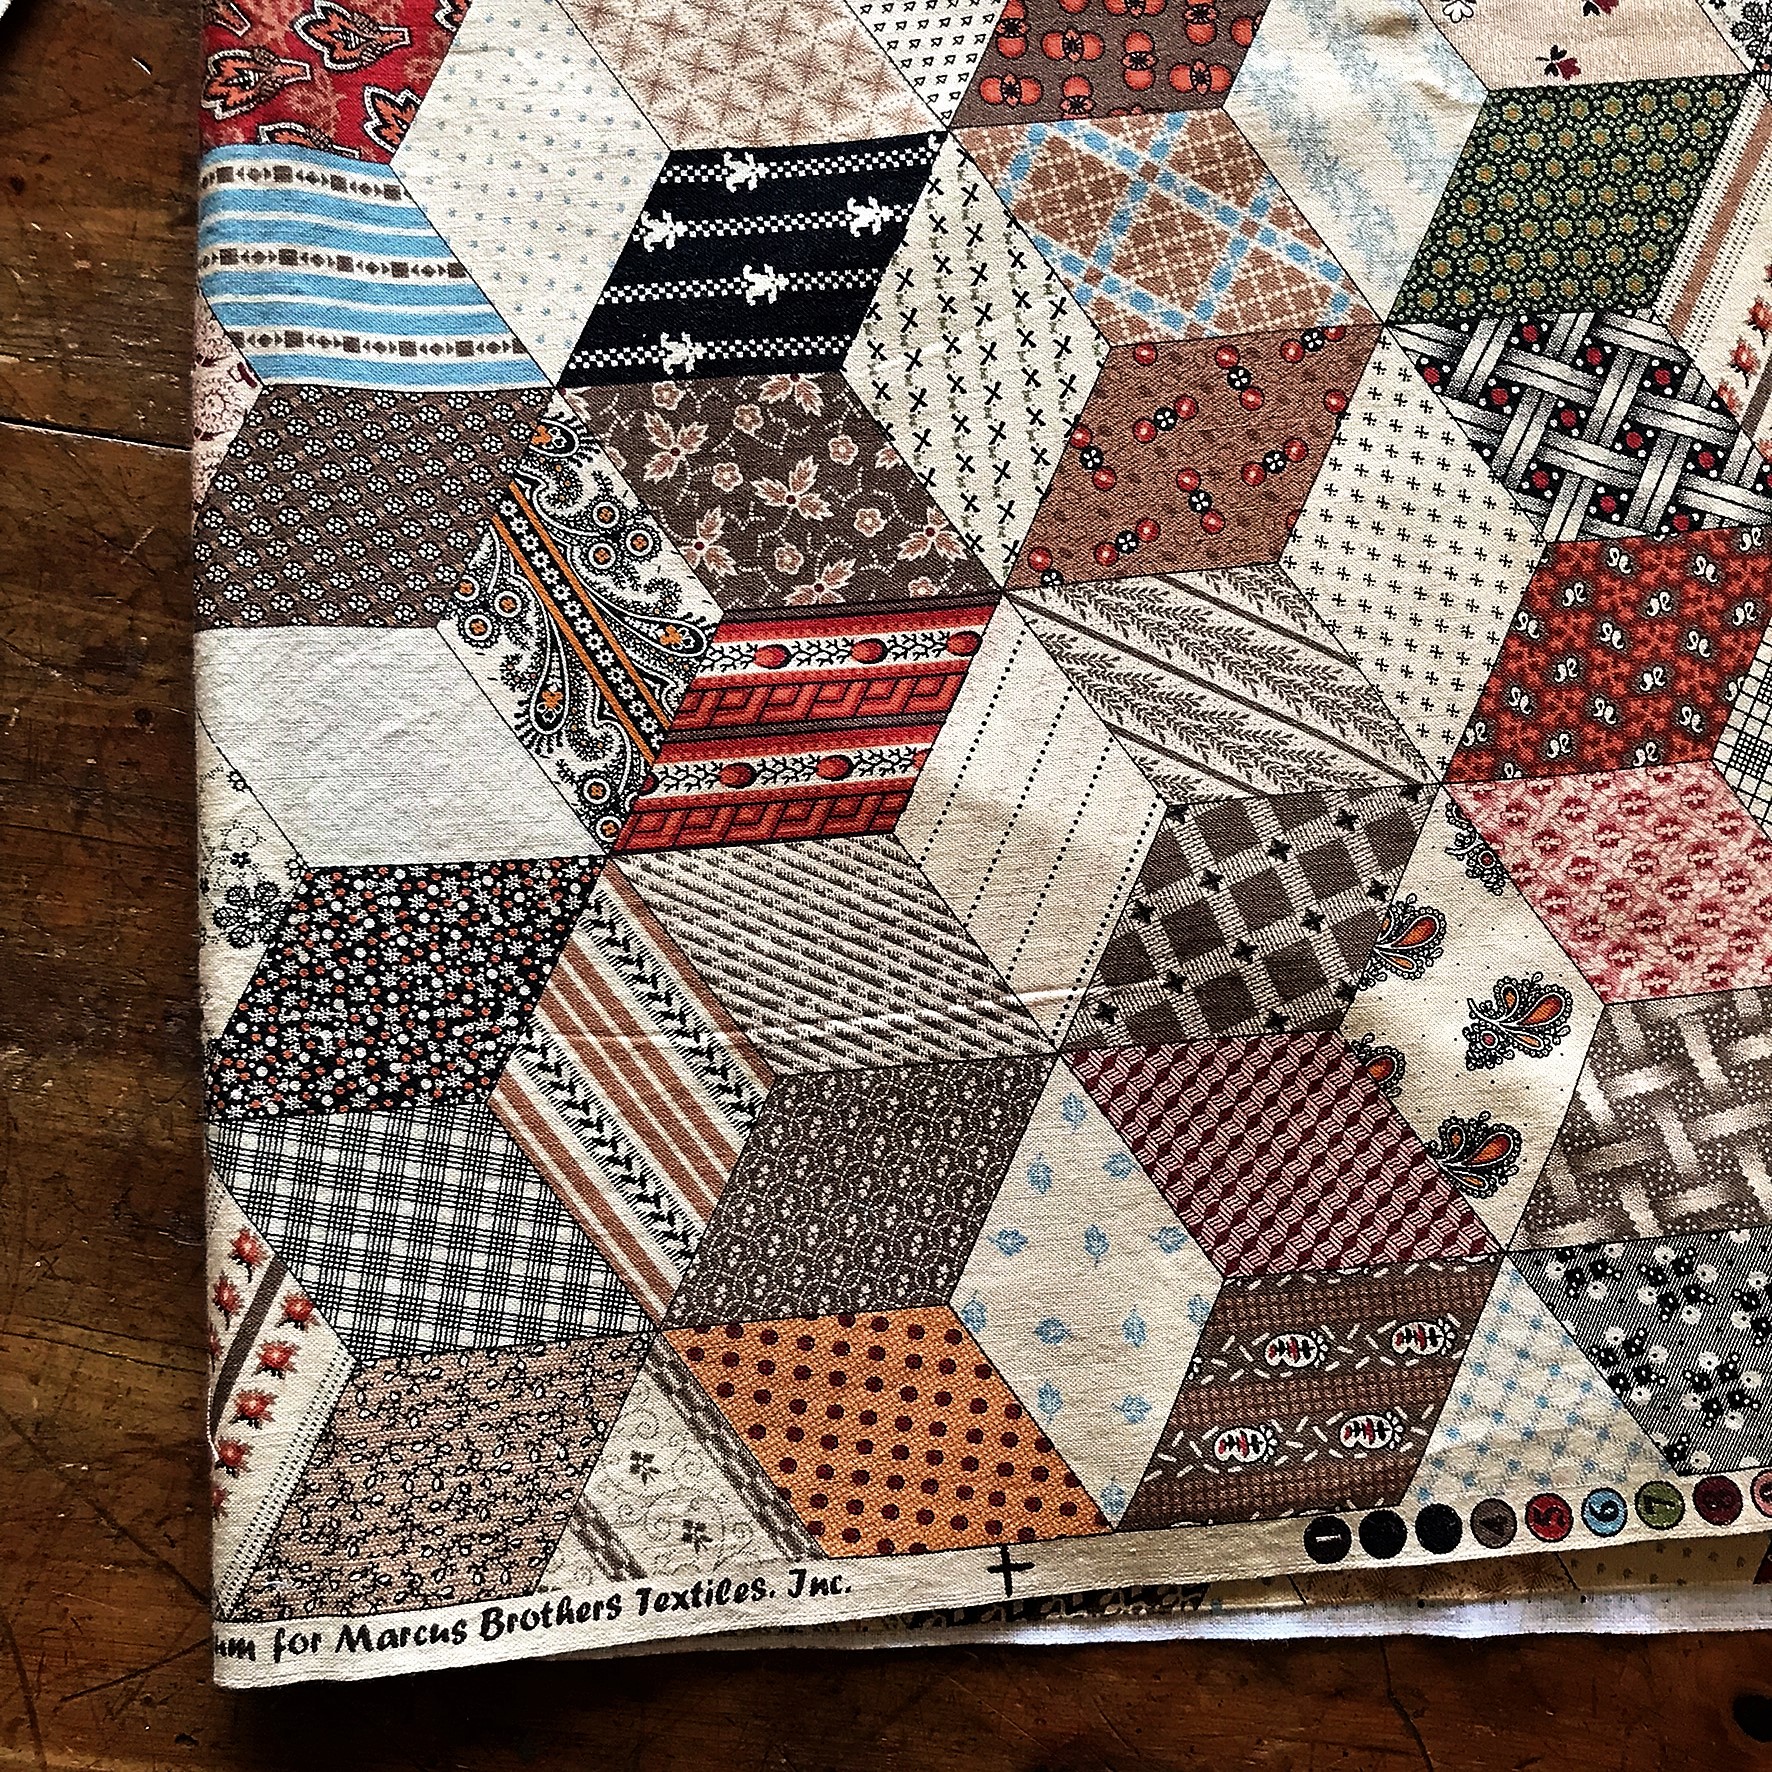 A Sentimental Quilter: Reproduction Fabric Panels